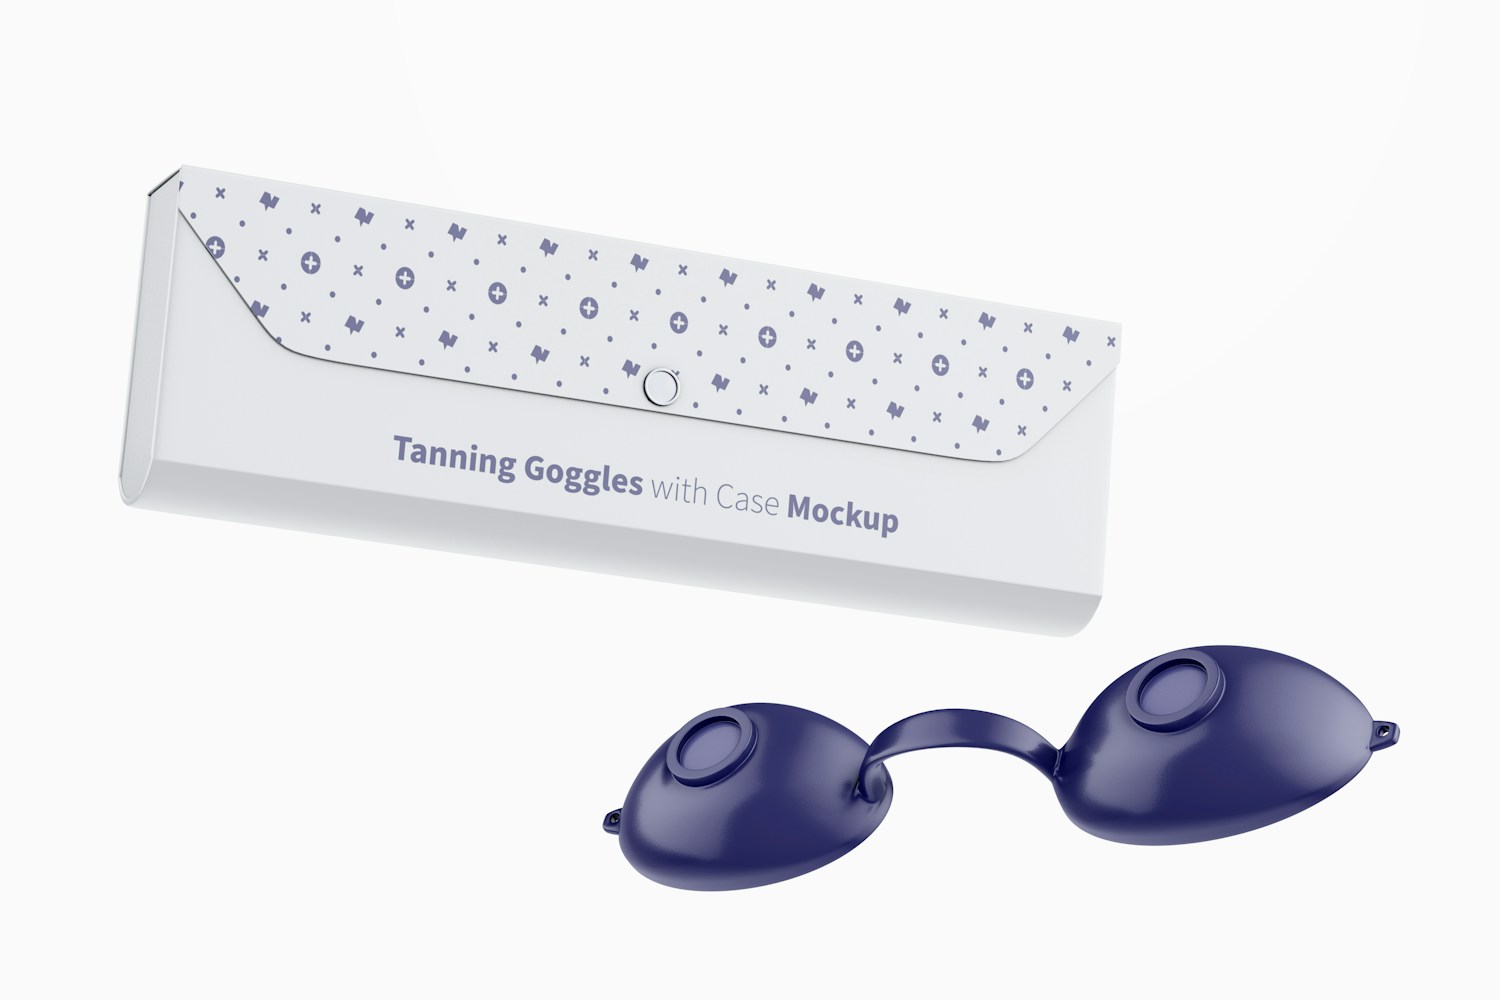 Tanning Goggles with Case Mockup, Floating